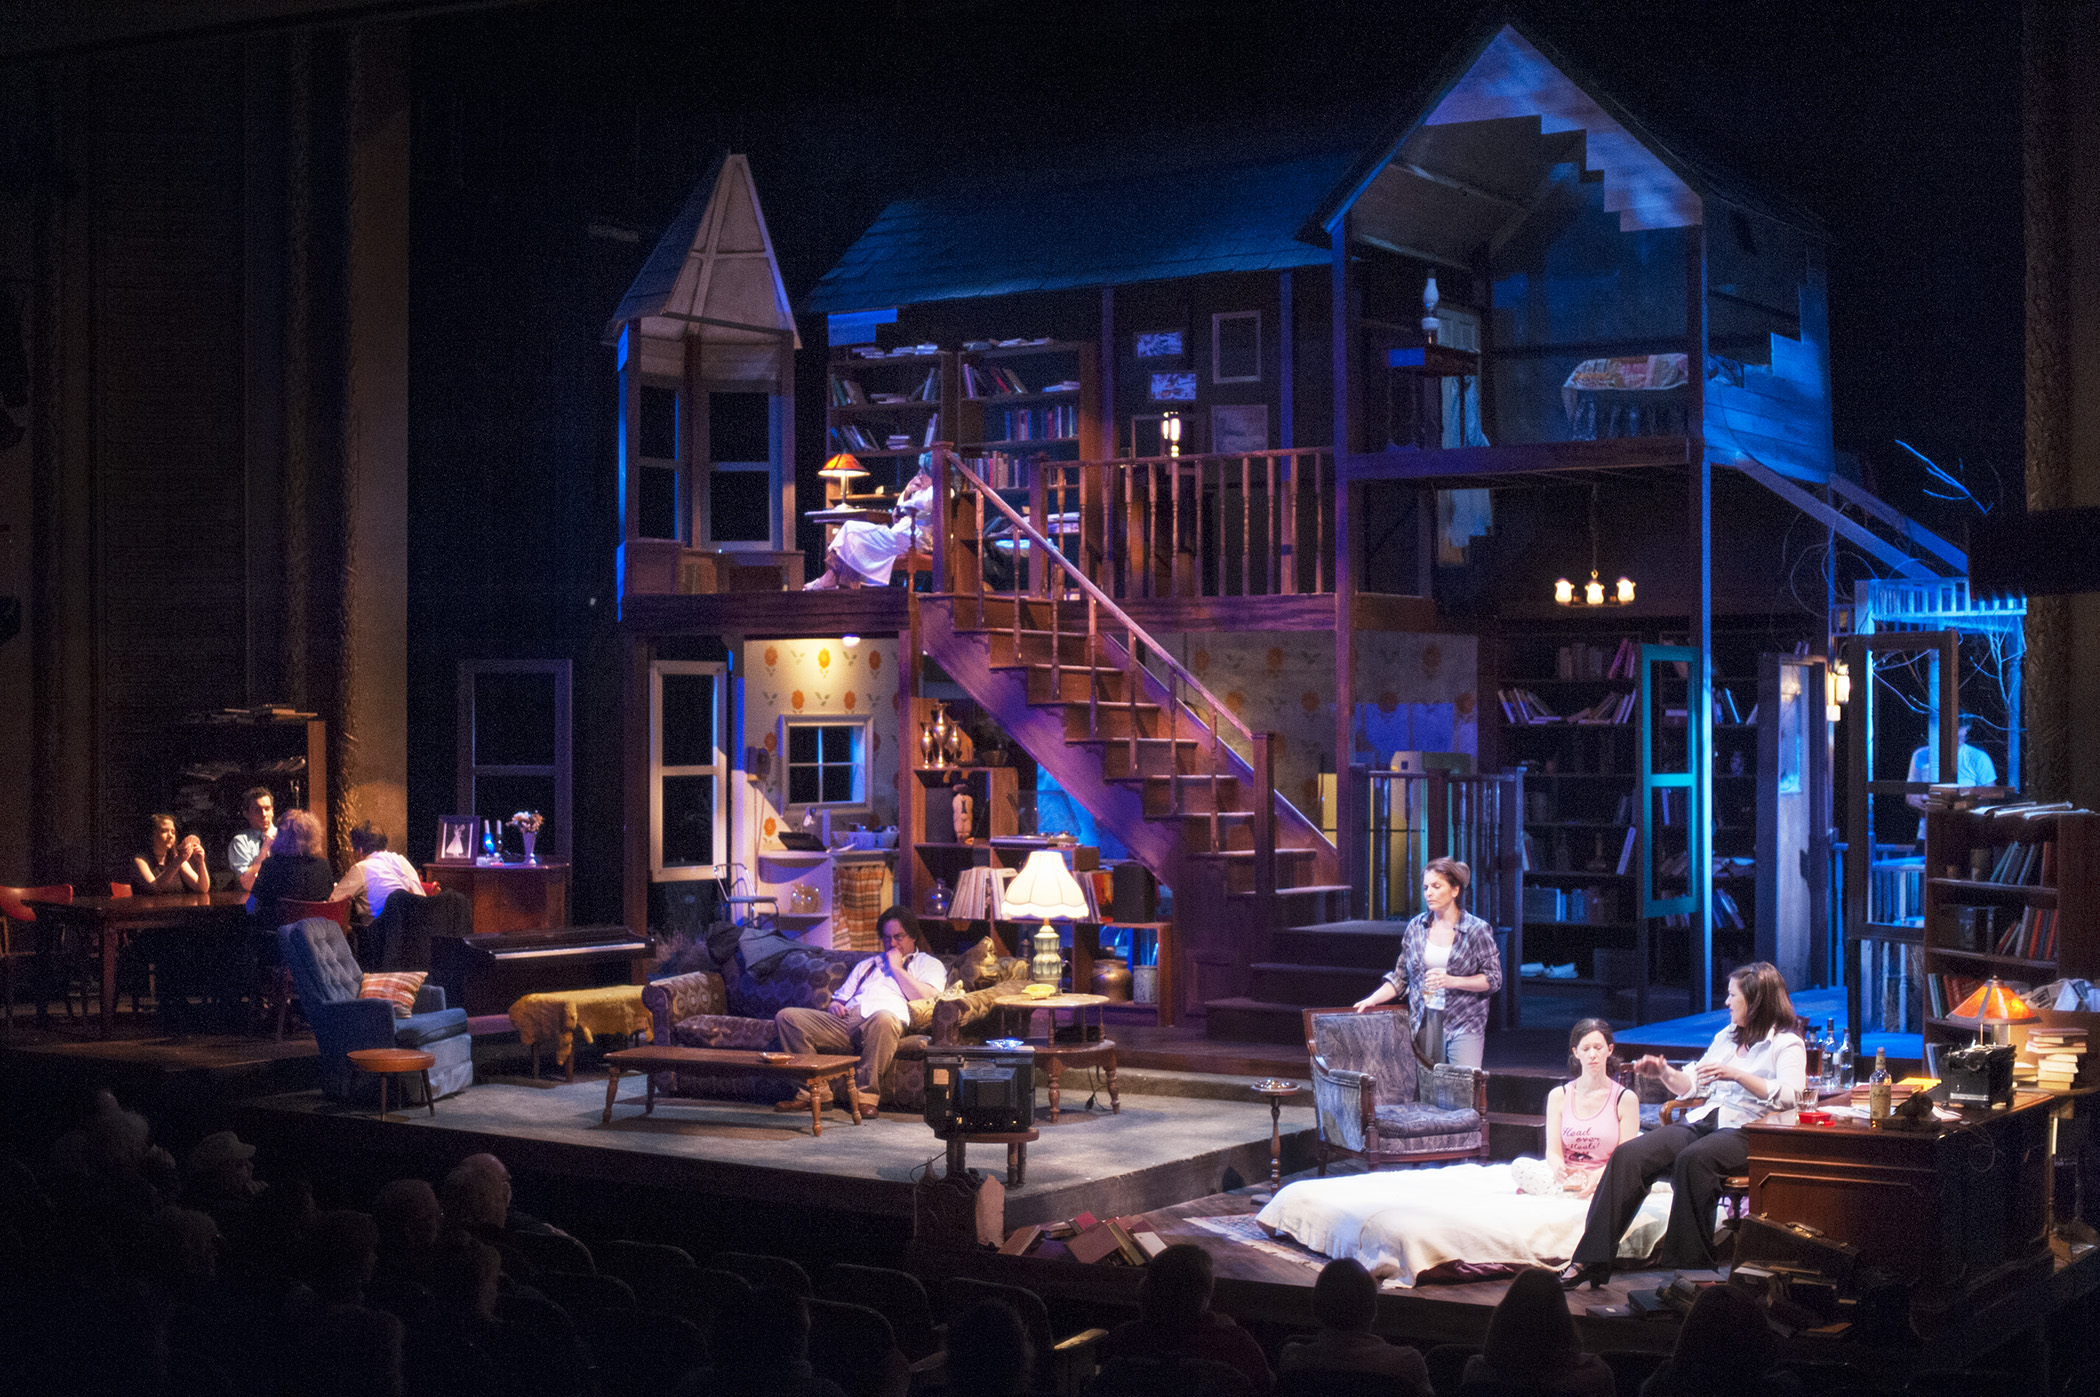 "August Osage County" at Penobscot Theatre Company in 2015. (Photo by © magnus stark)